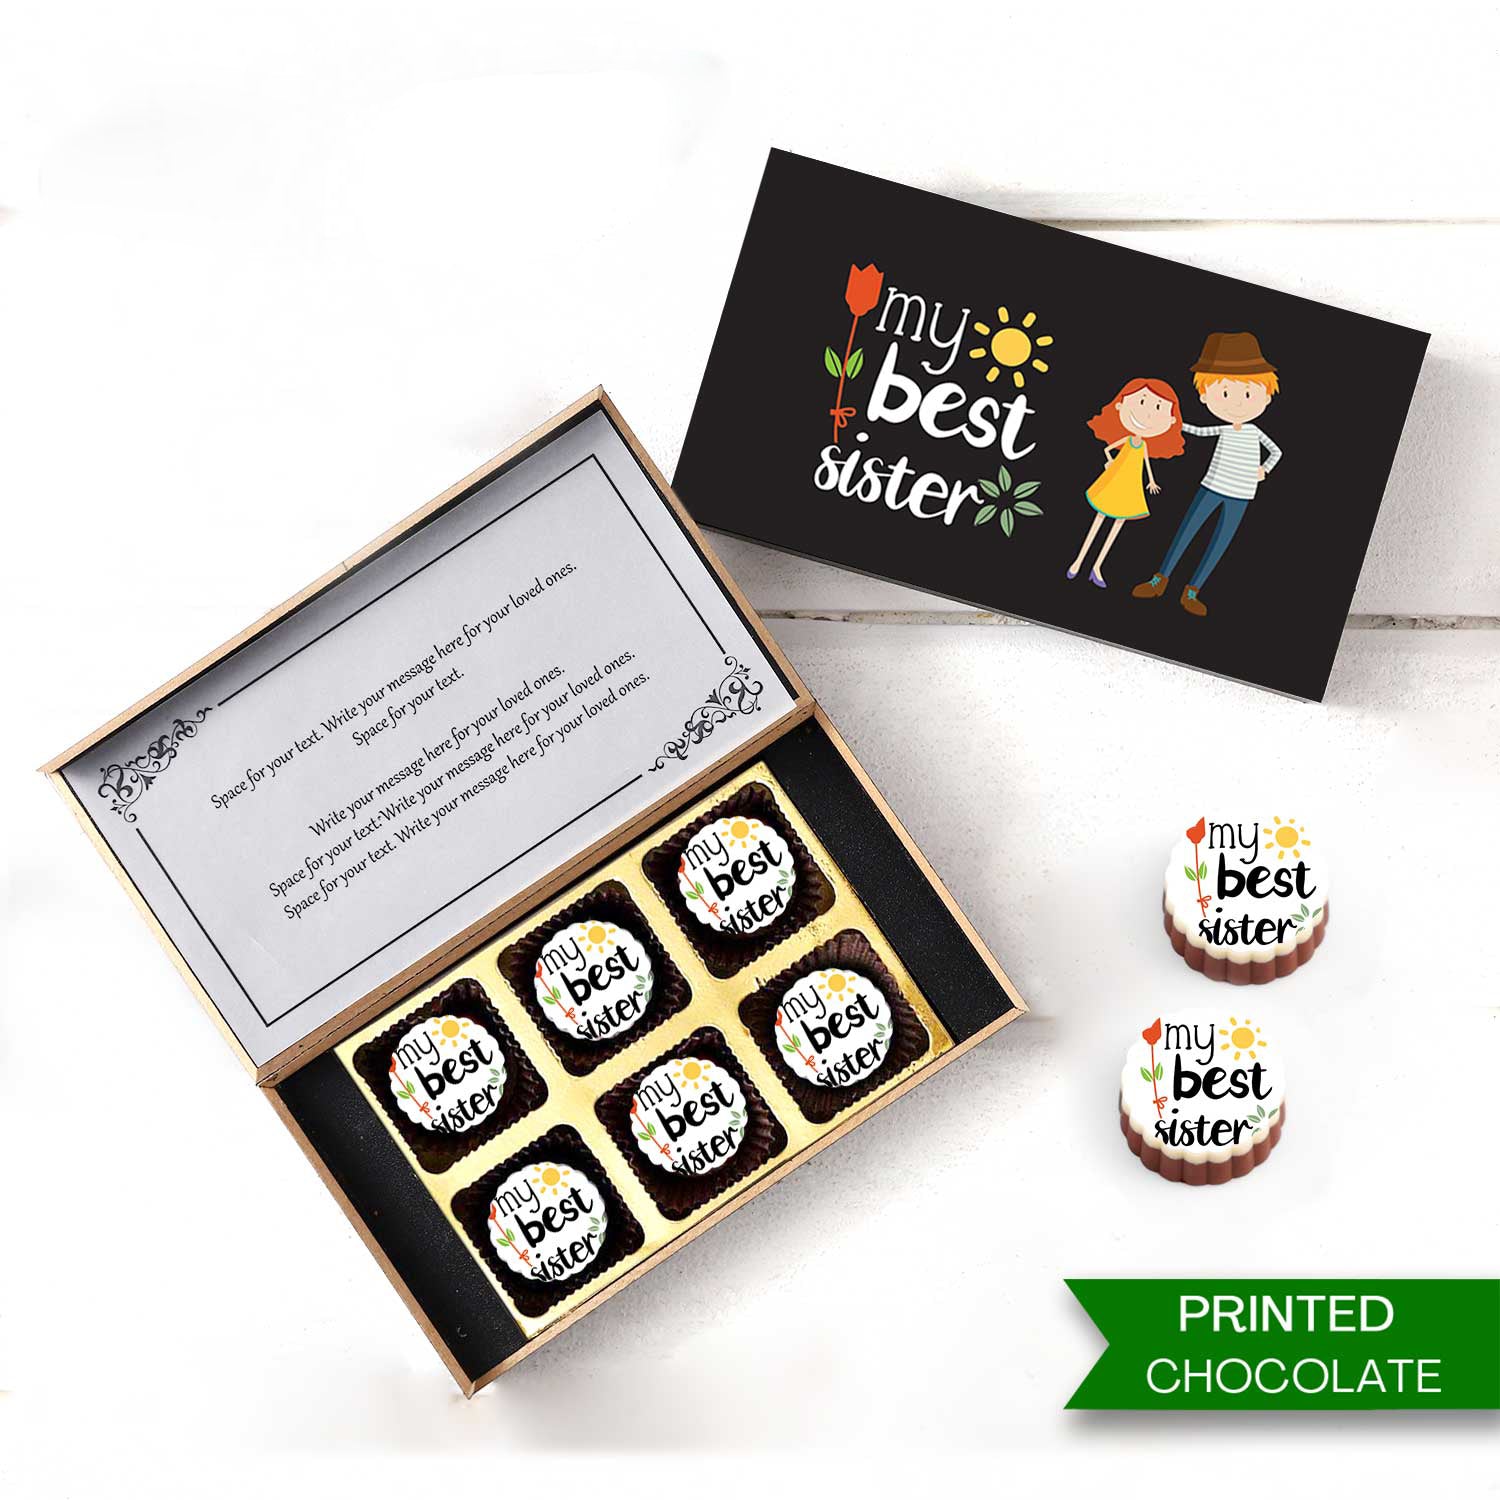 Personalised Printed Chocolate Gift for Sister